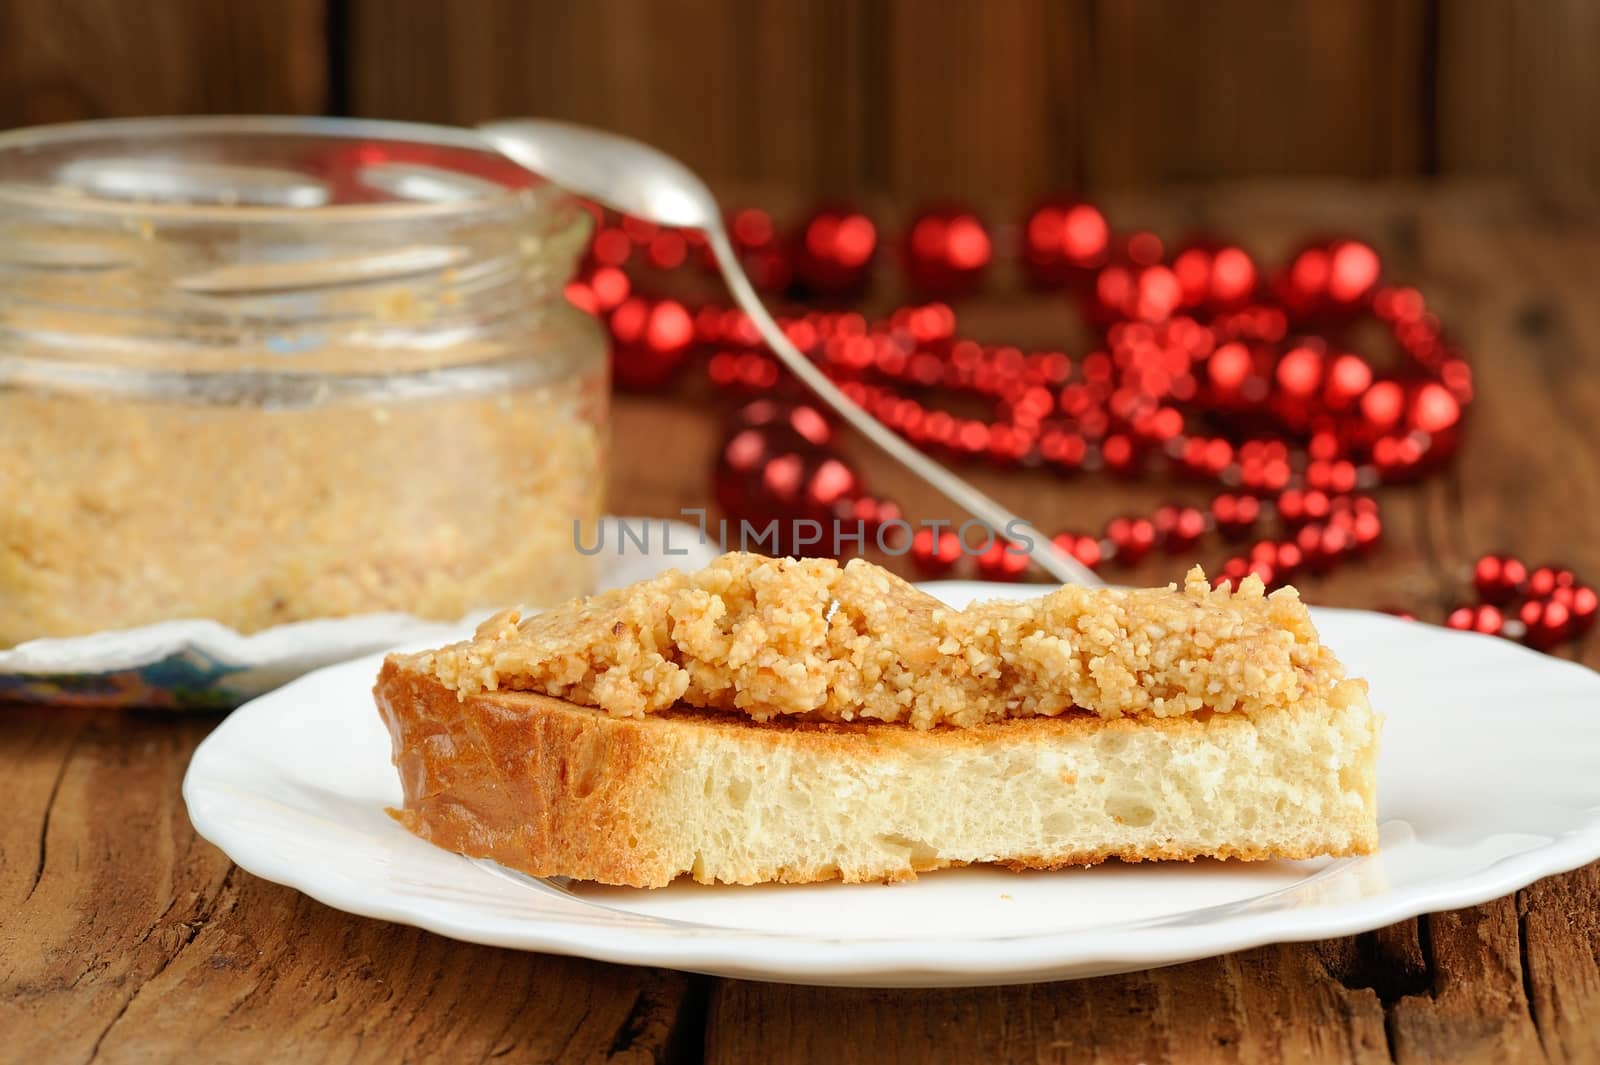 Homemade peanut paste on toast on white plate and wood background